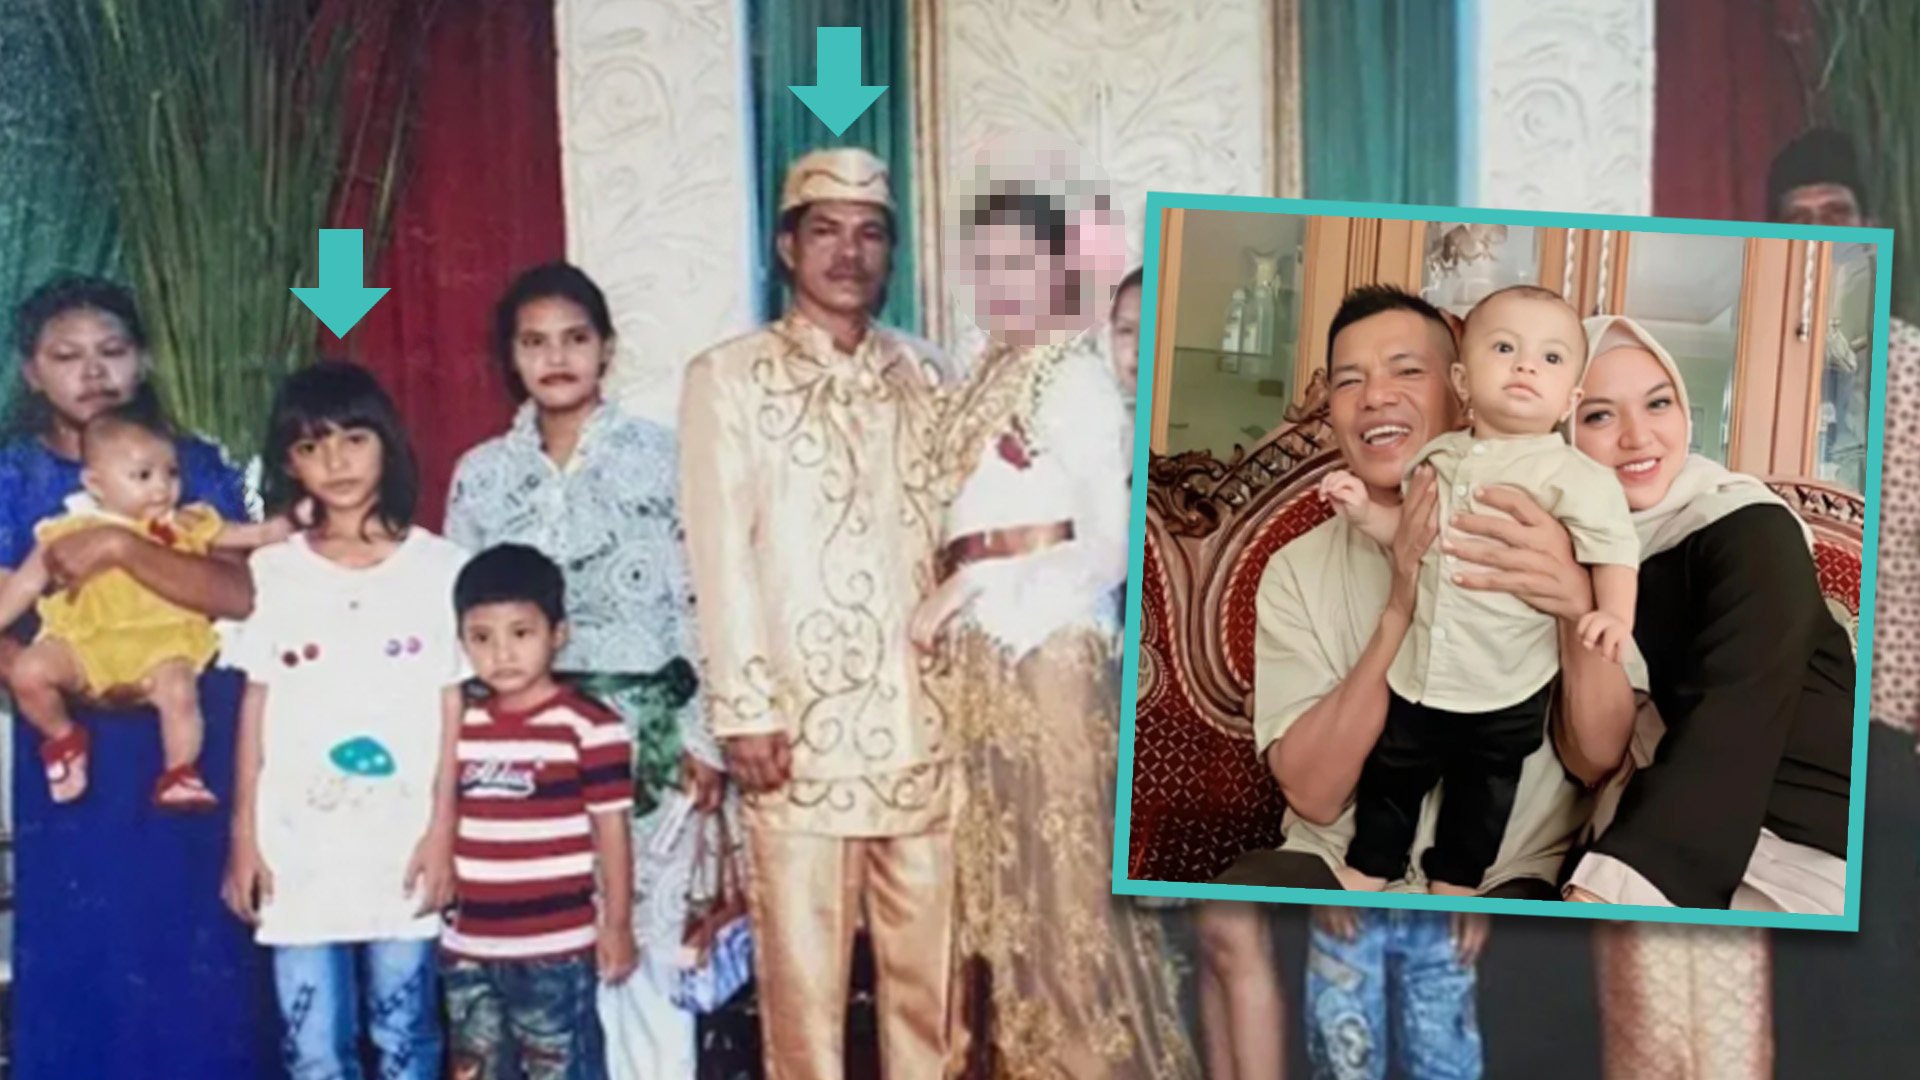 A 19-year-old Indonesian woman finds out after marrying a man aged 57, that she attended a previous wedding of his when she was just nine years old. Photo: SCMP composite/QQ.com